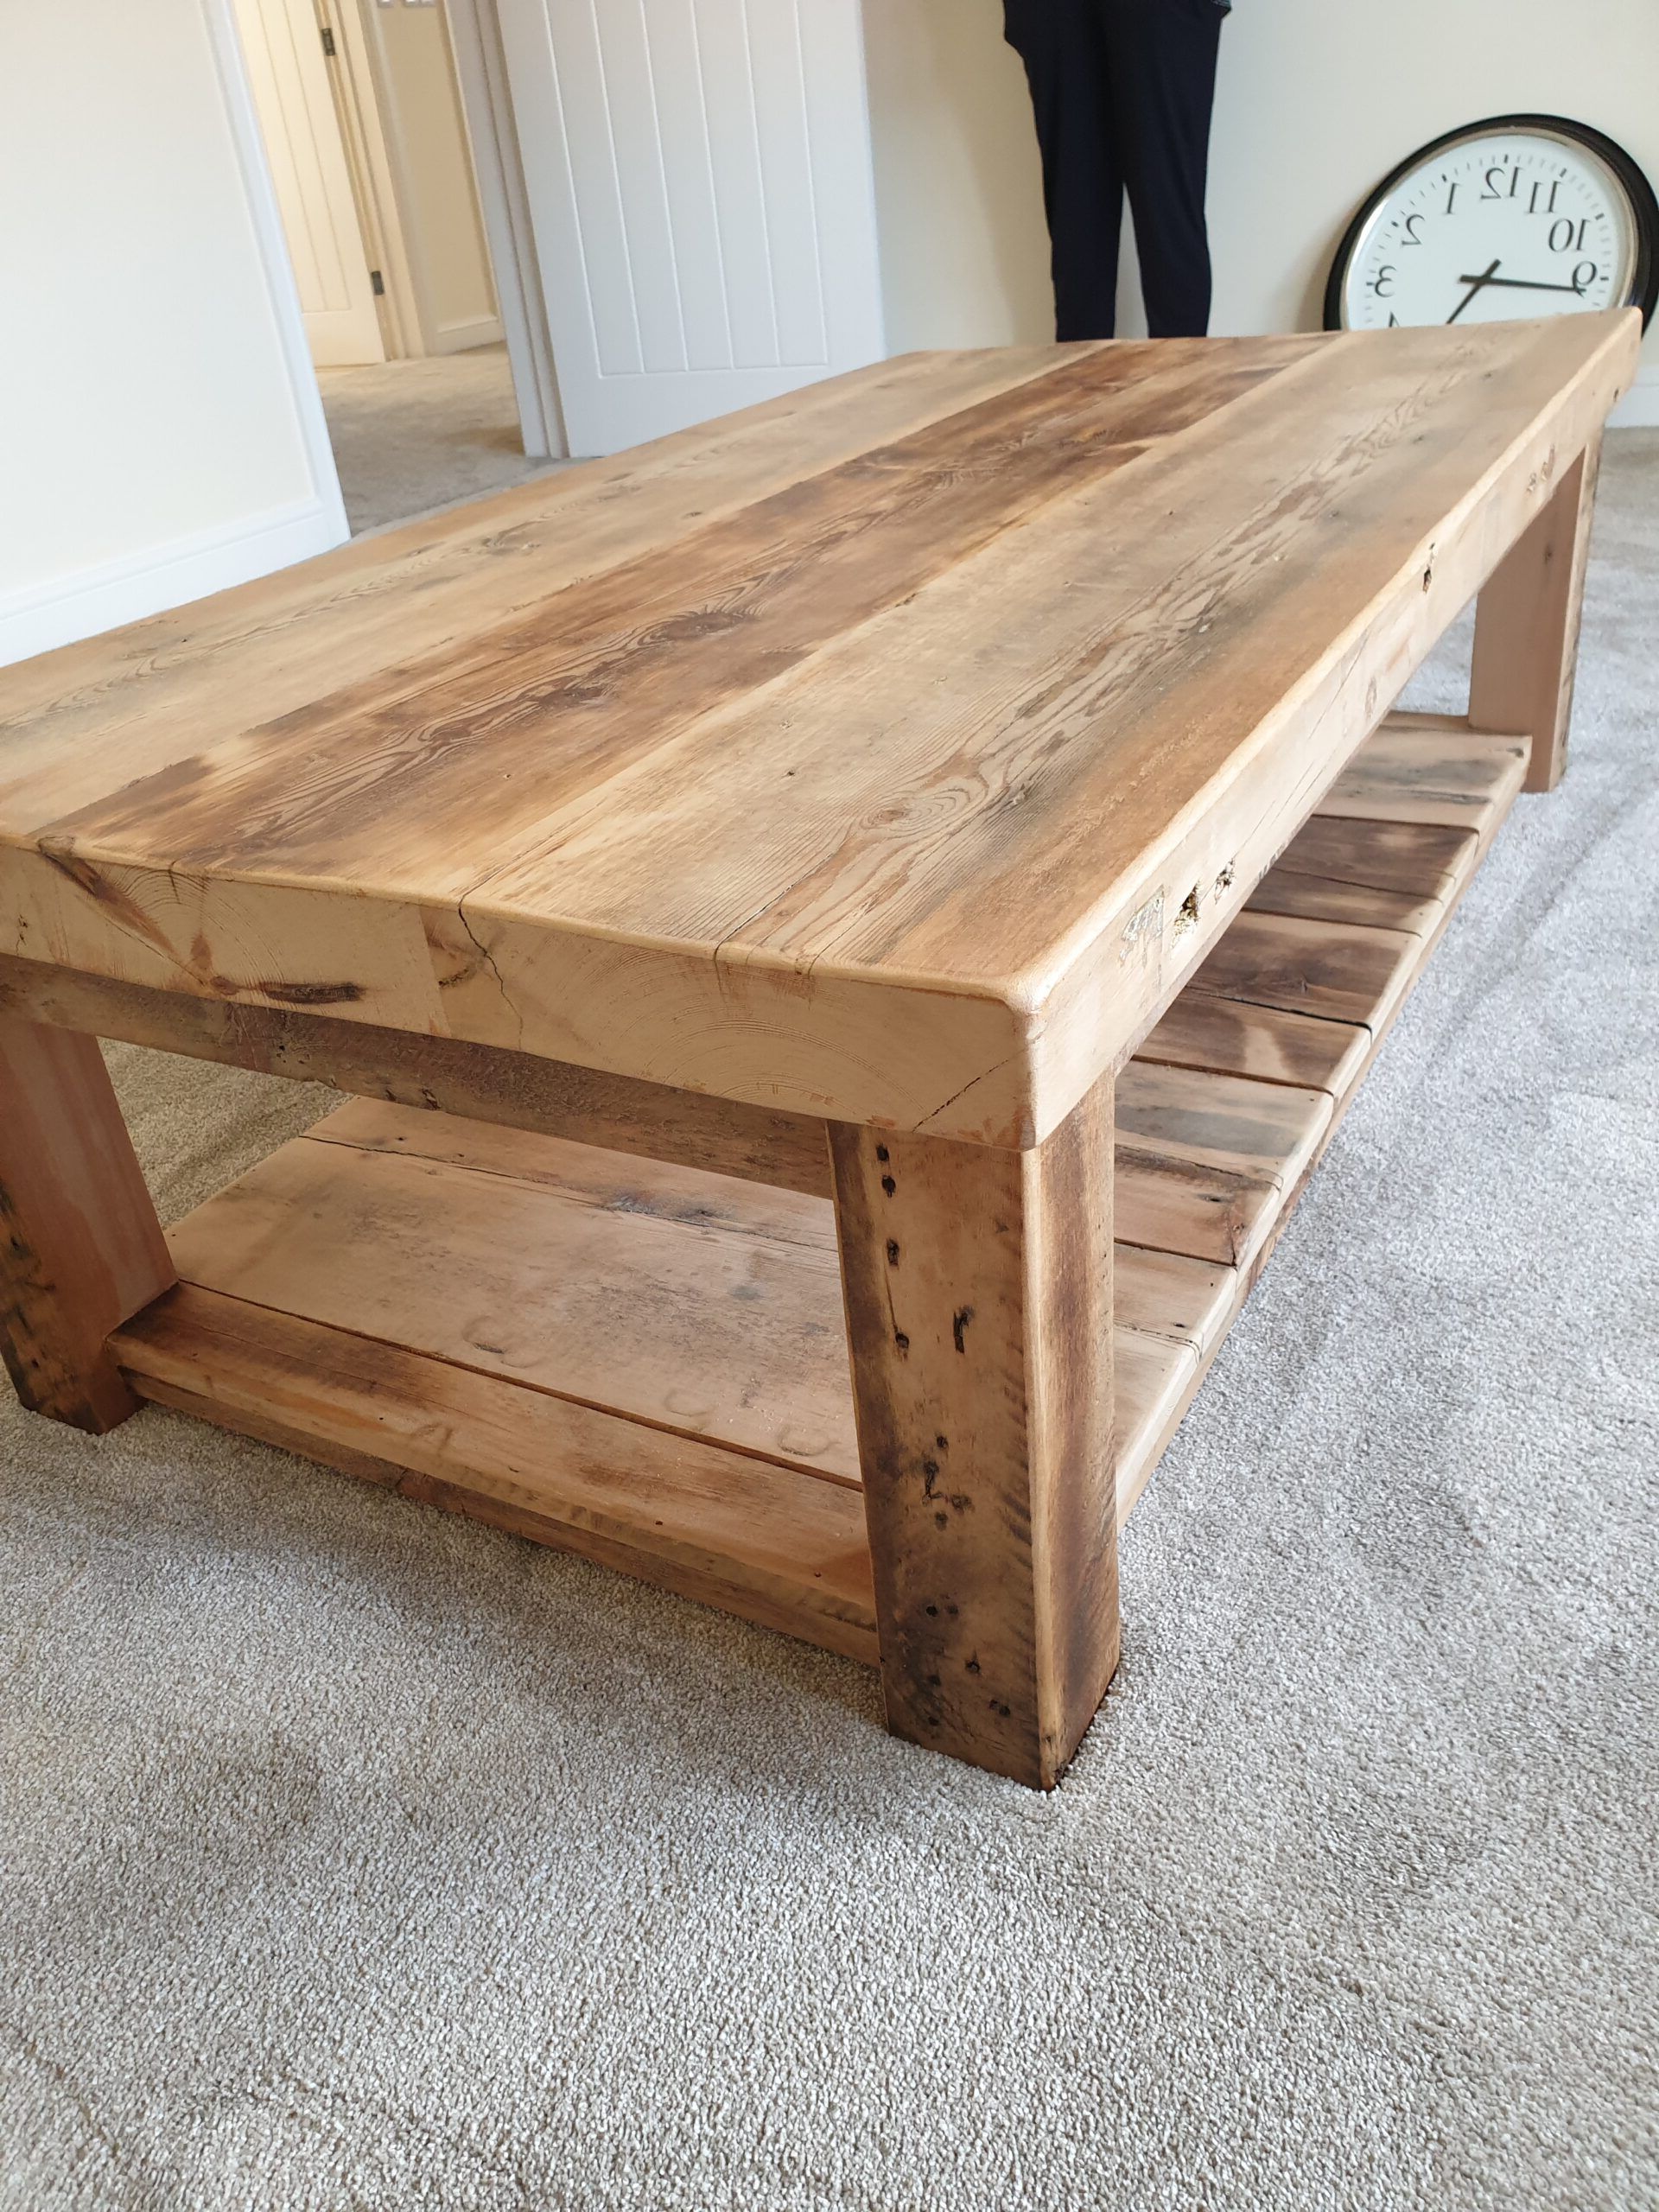 Rustic Coffee Tables Intended For Most Up To Date Buy Rustic Wood Coffee Table Made From Reclaimed Timber (View 10 of 10)